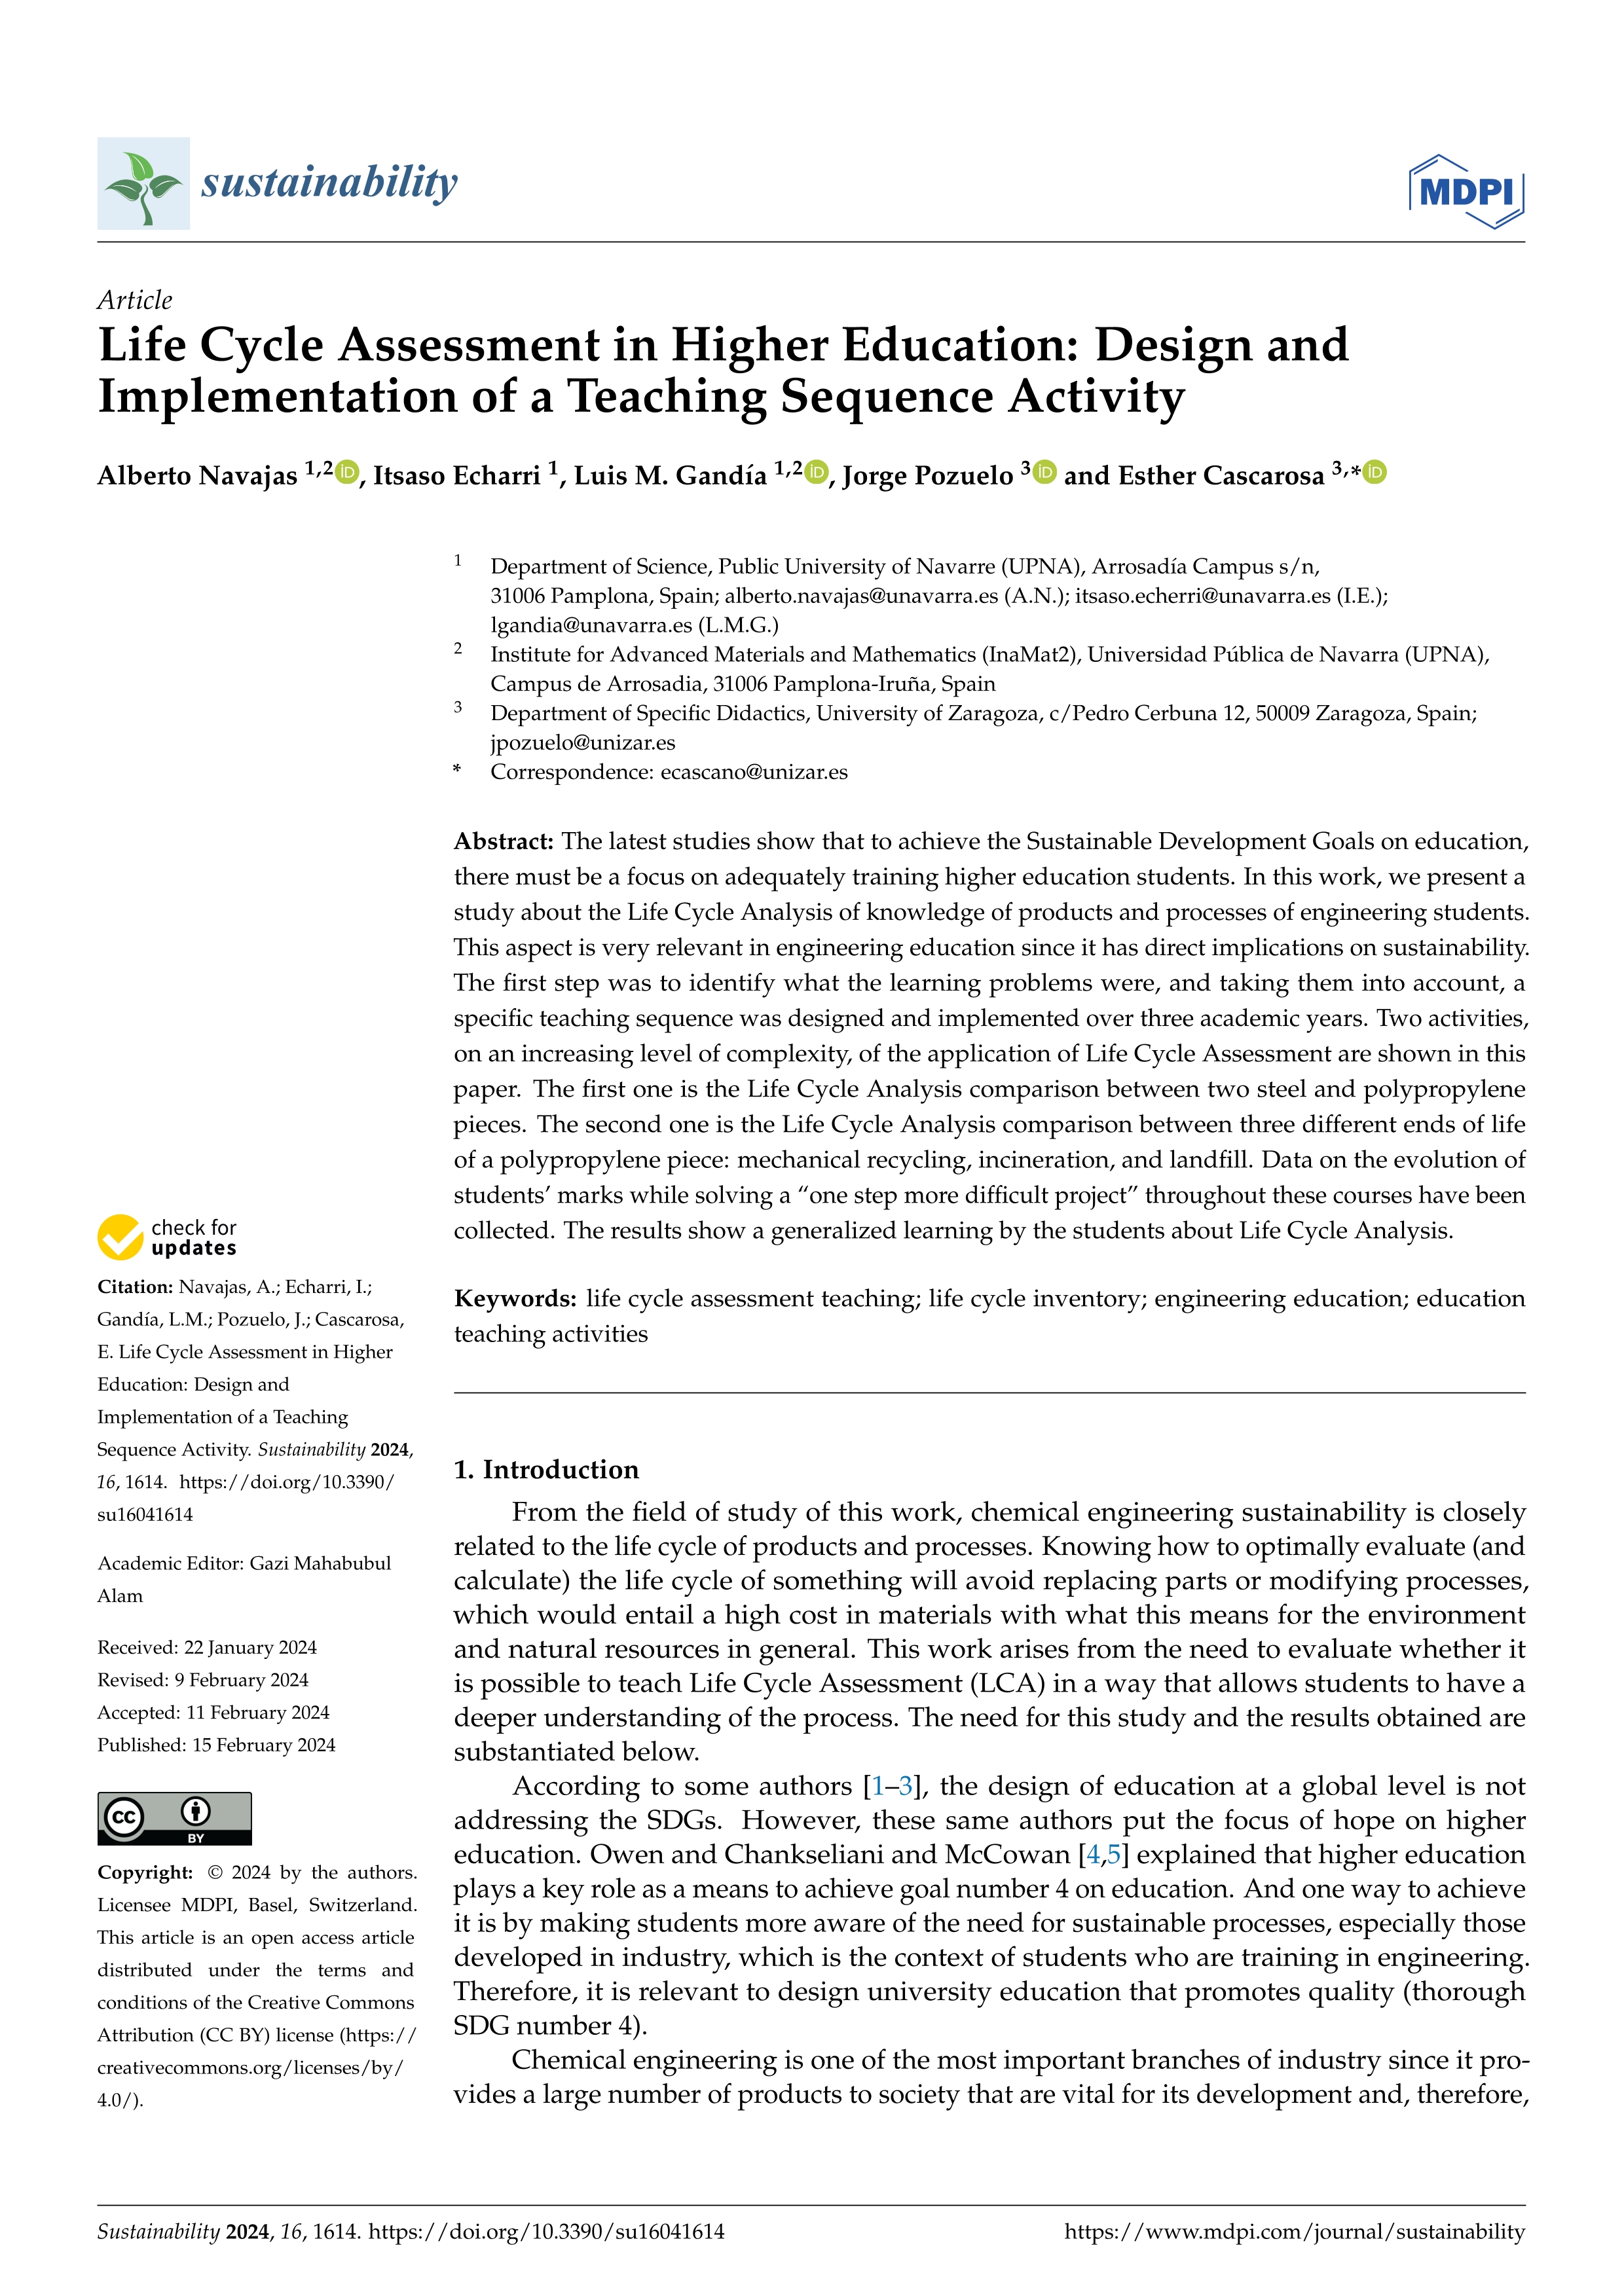 Life Cycle Assessment in Higher Education: Design and Implementation of a Teaching Sequence Activity